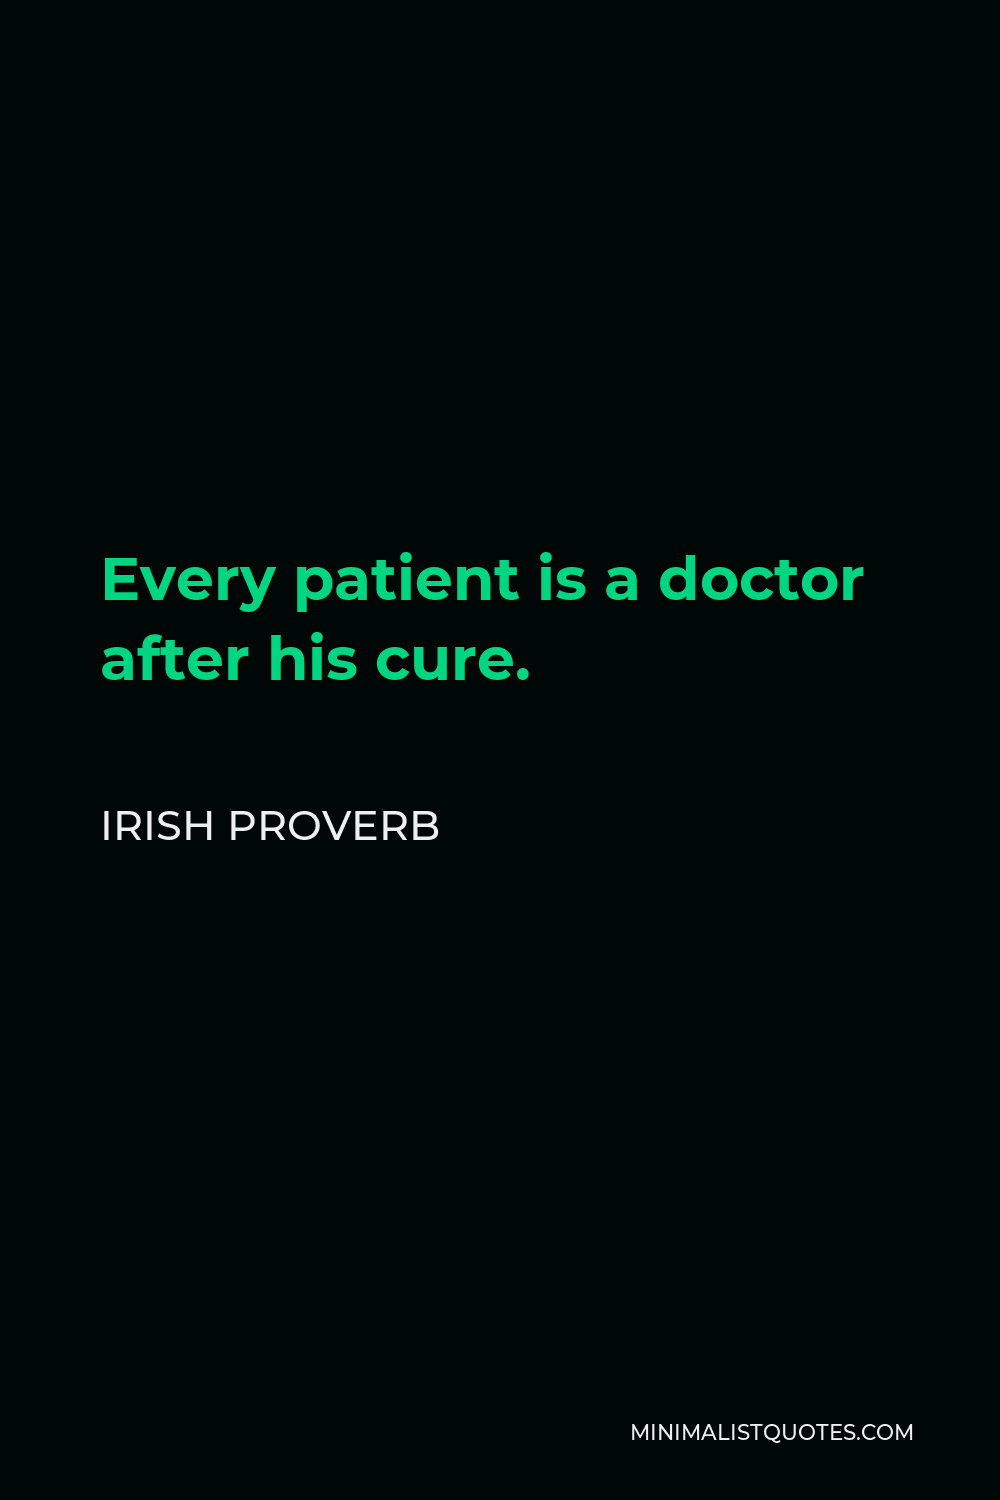 Irish Proverb Quote - Every patient is a doctor after his cure.